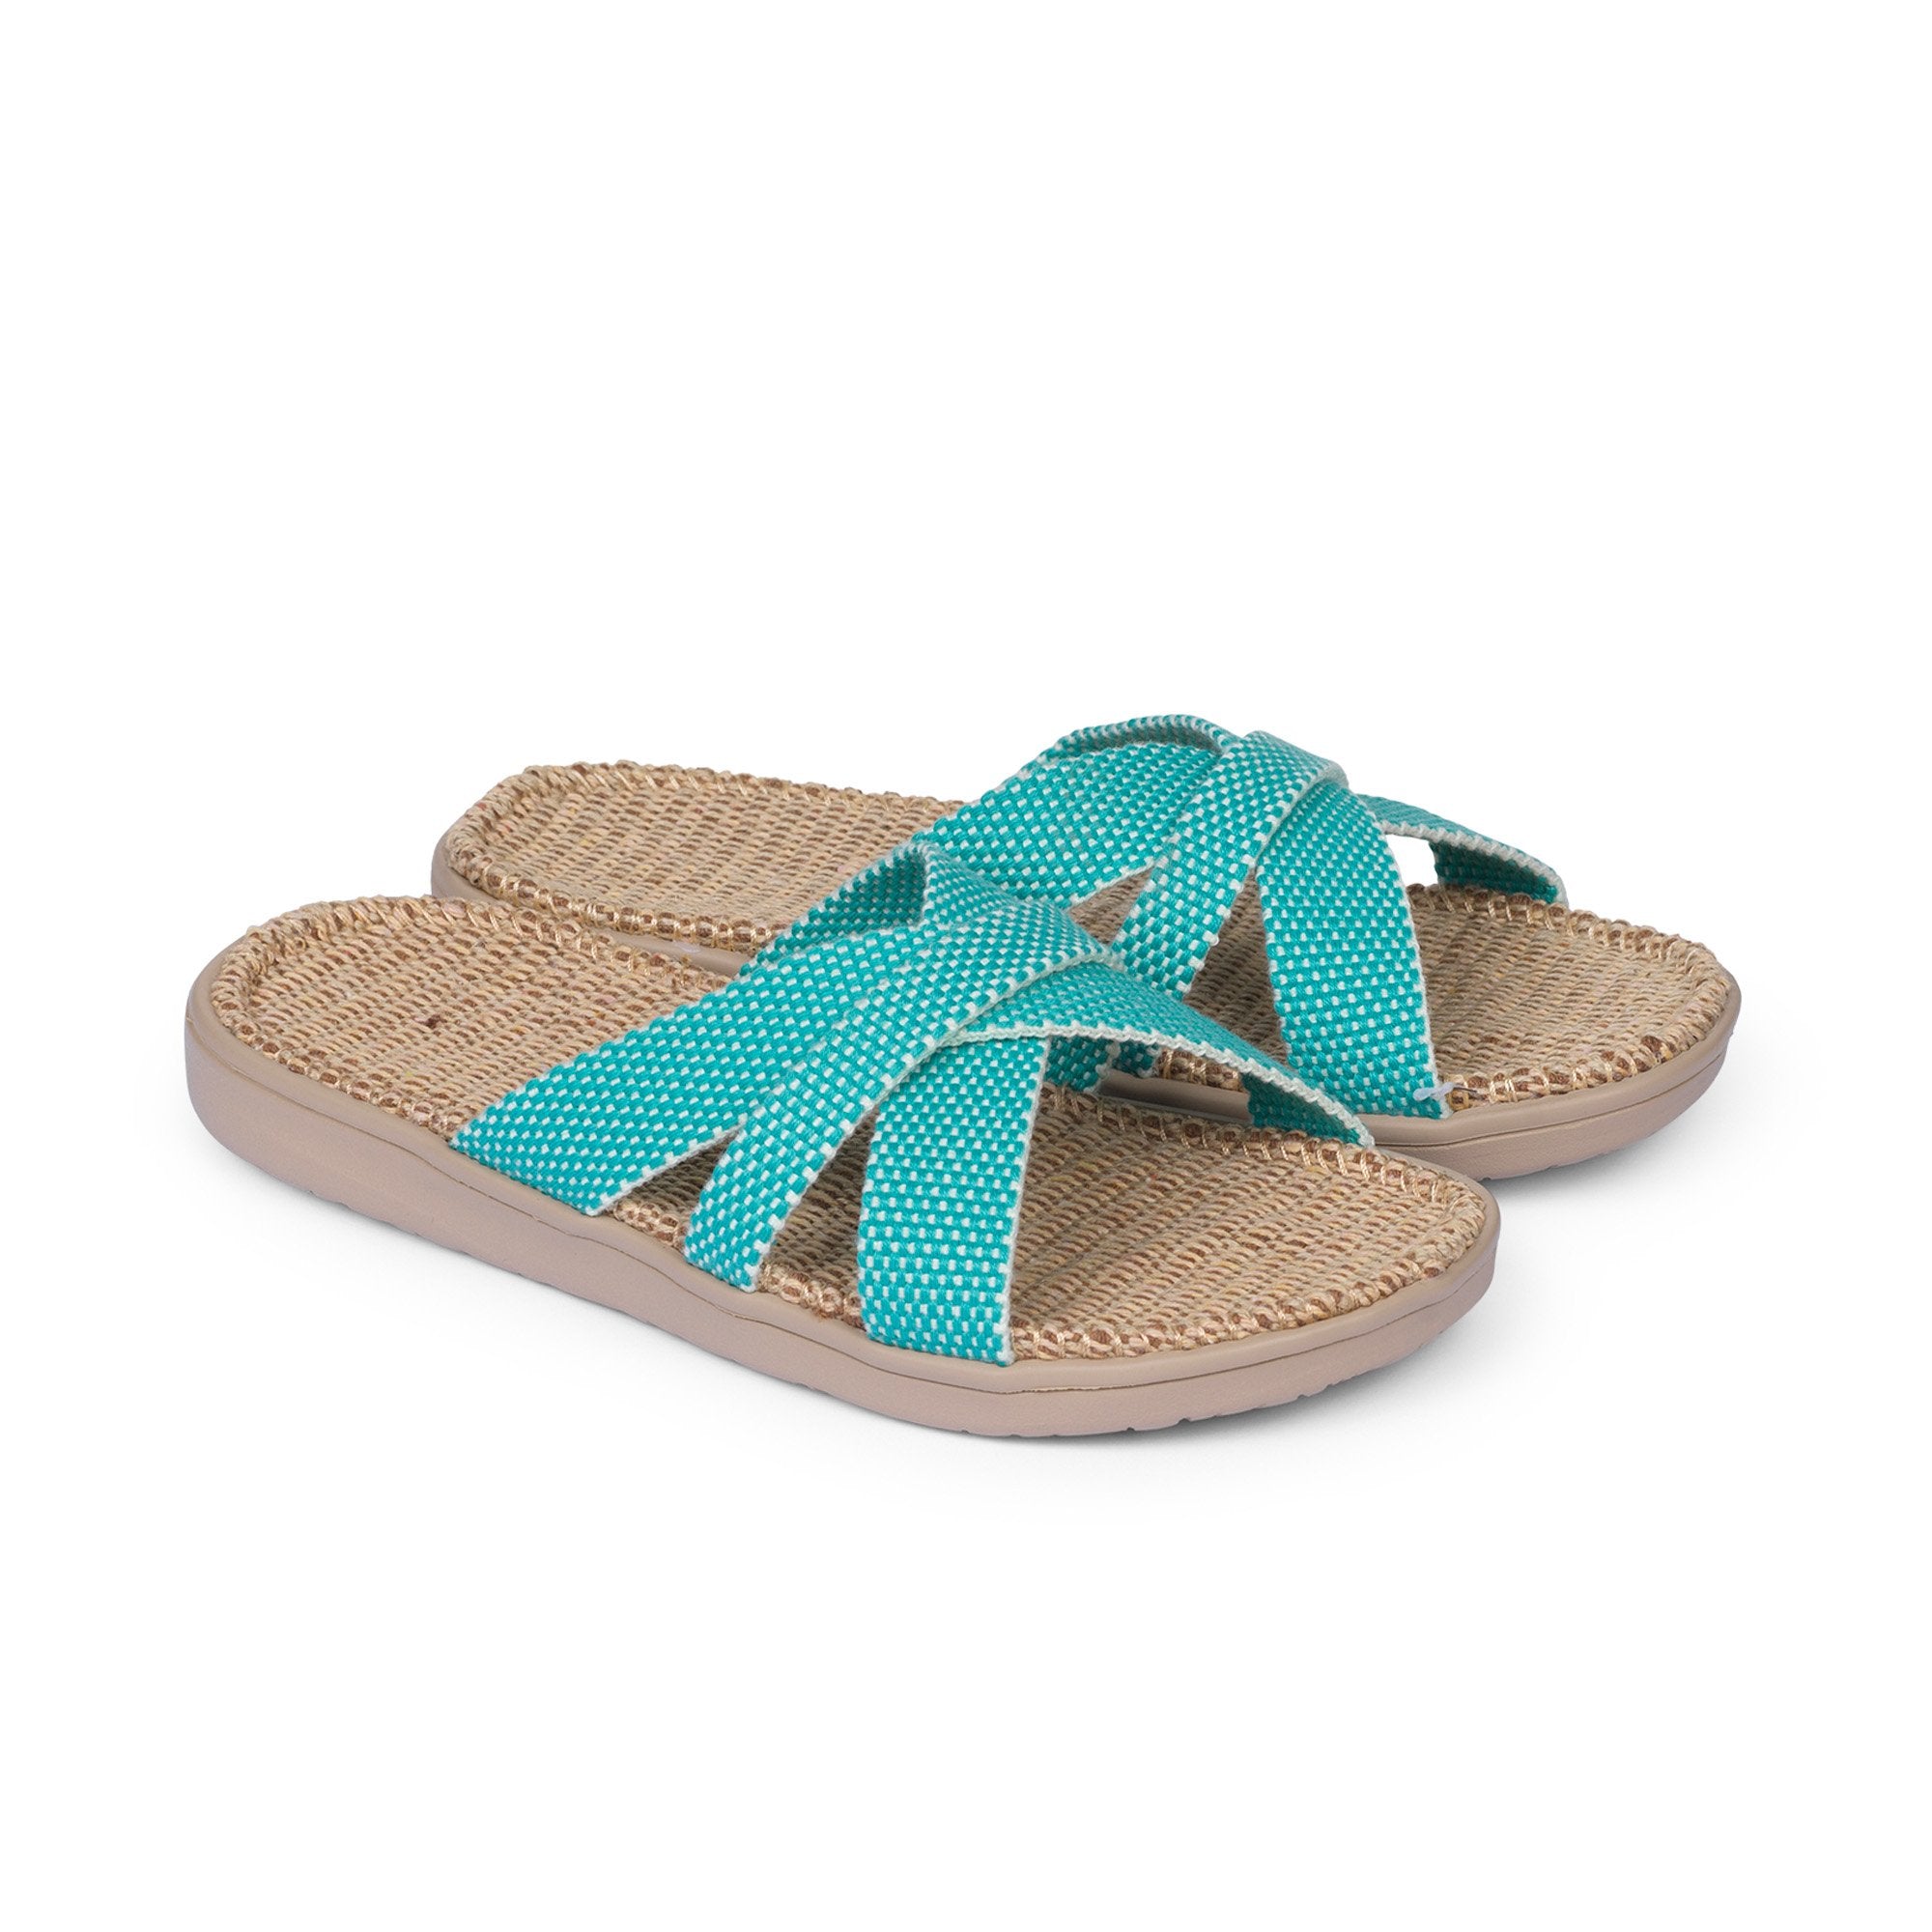 Summer sandals for kids from danish brand Lovelies. The rubber sole is nice and soft which makes the sandal very comfortable. The inner sole is covered with woven jute and the straps are med of fine cotton.